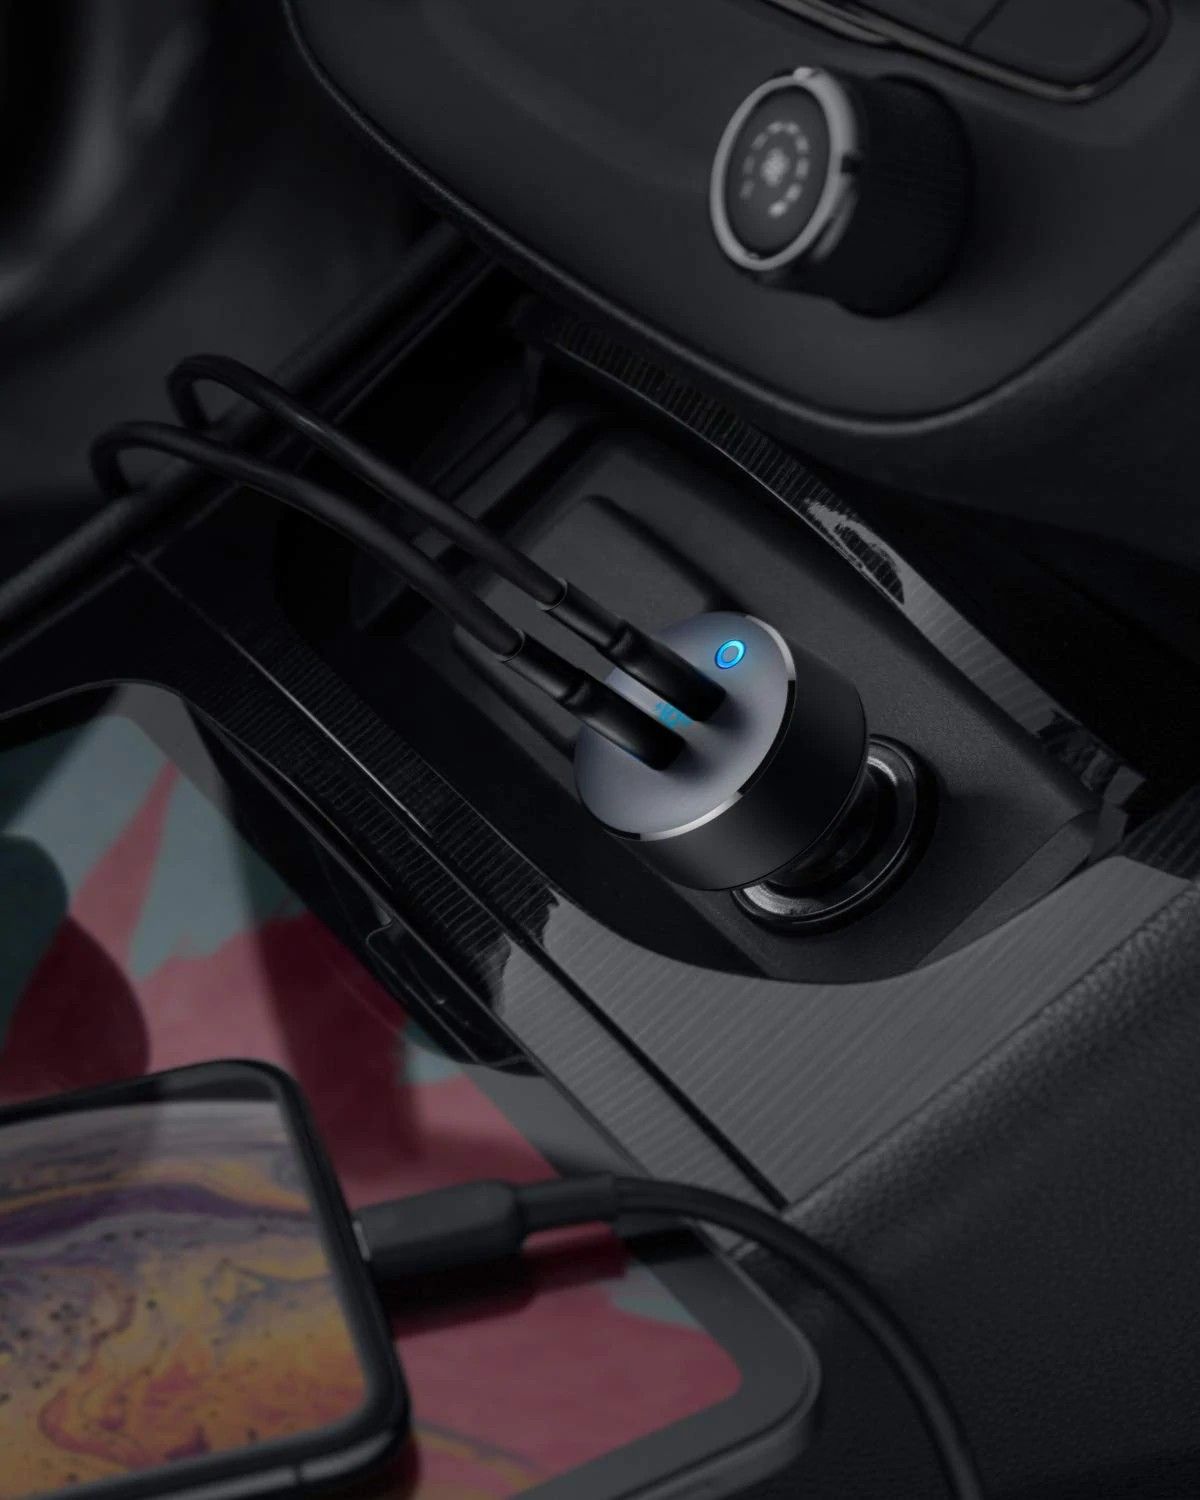 The Anker PowerDrive III Duo plugged into a car